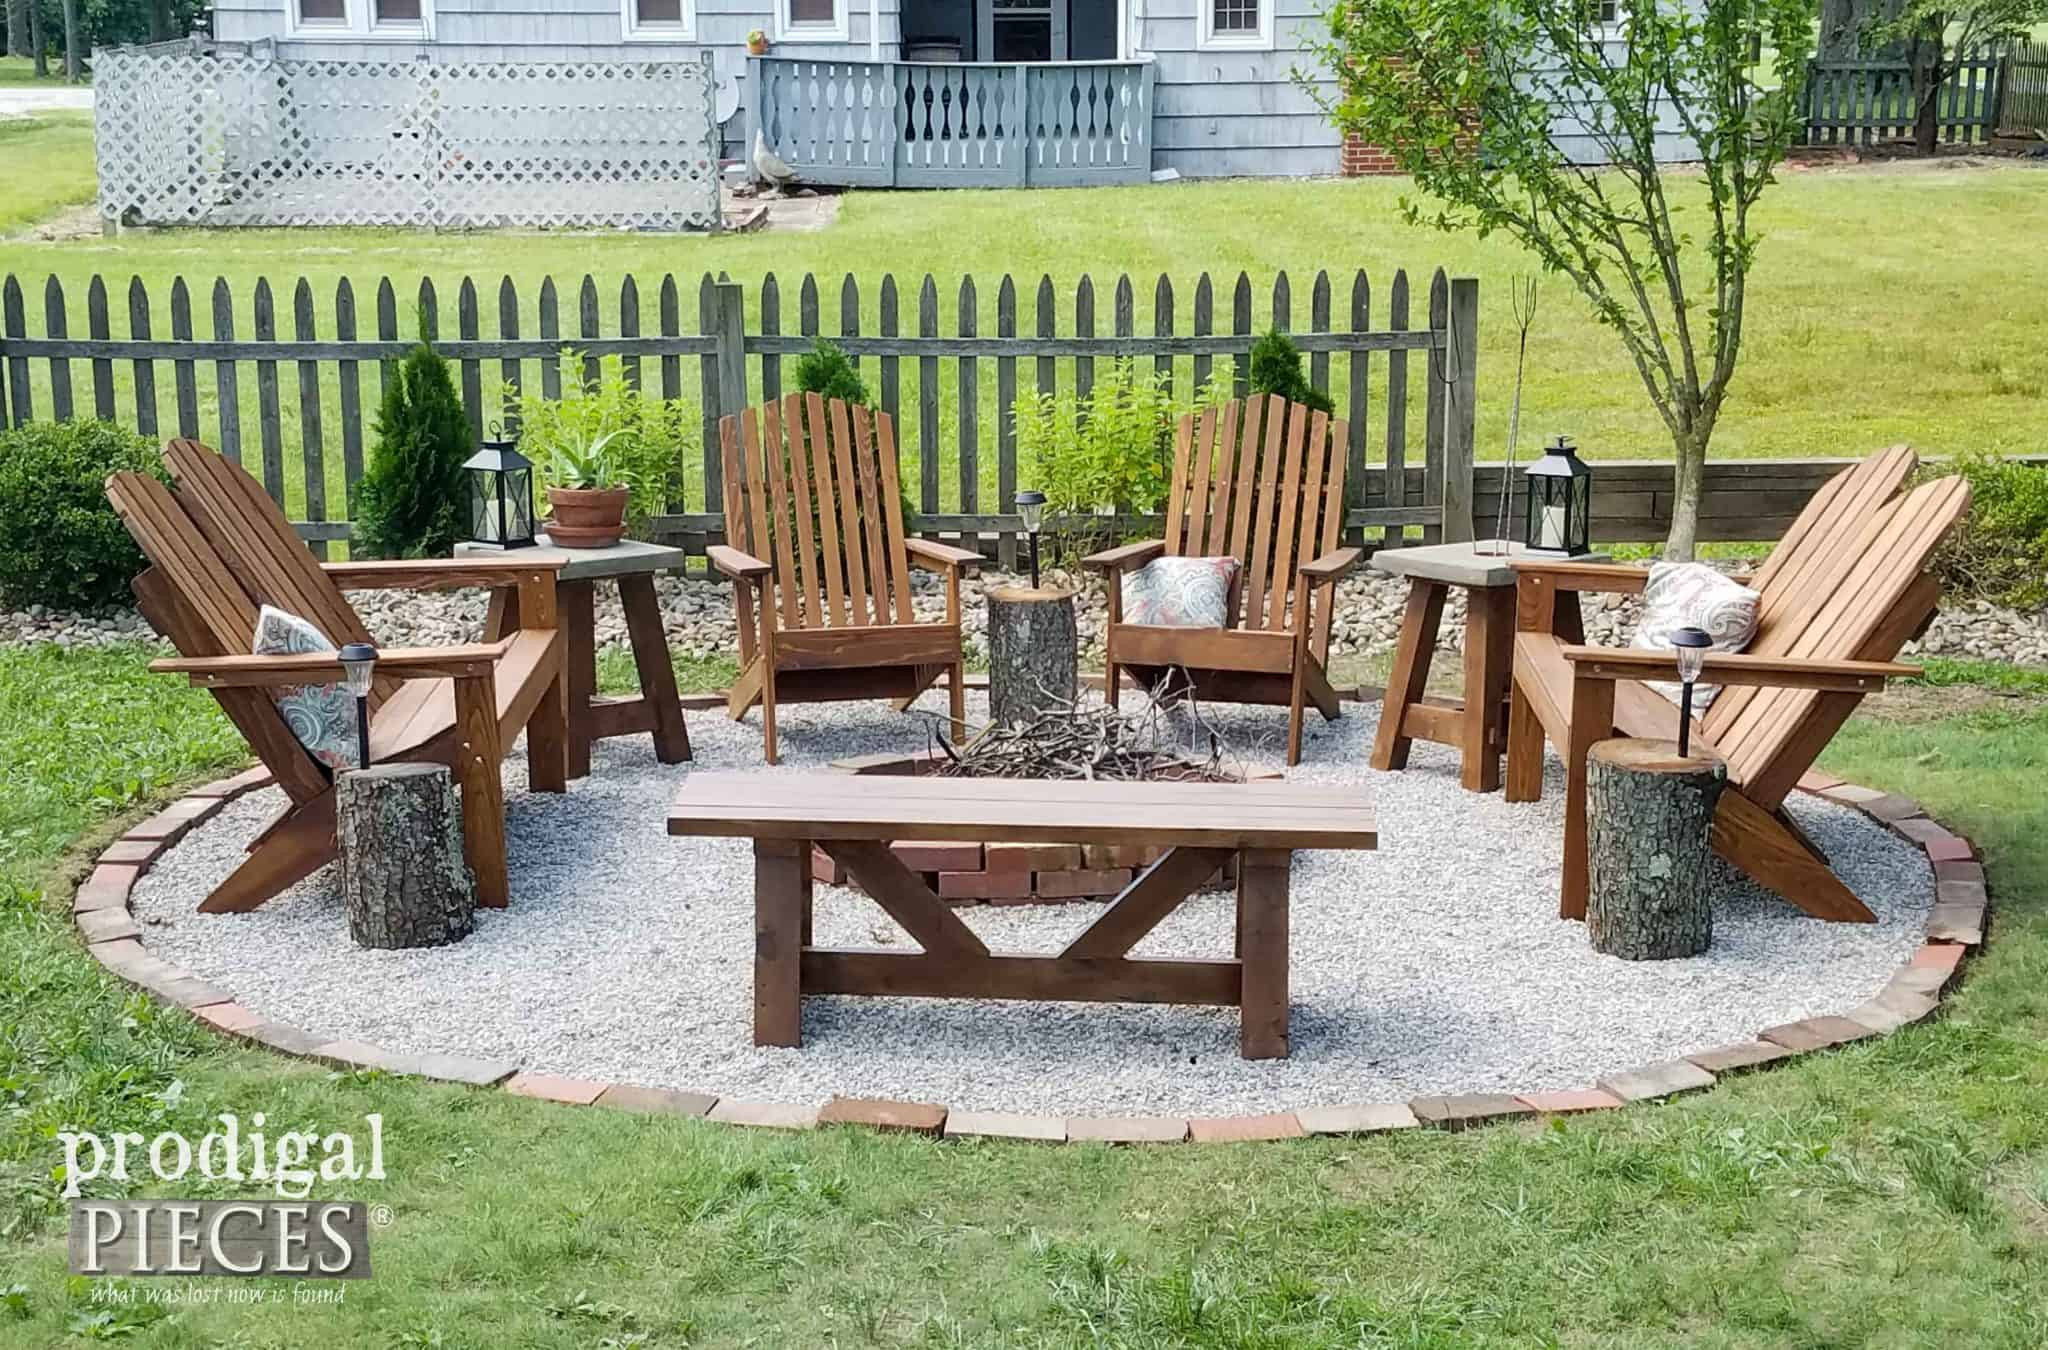 Diy Fire Pit Patio
 Check Out These 12 DIY Fire Pits To Prepare For Summertime